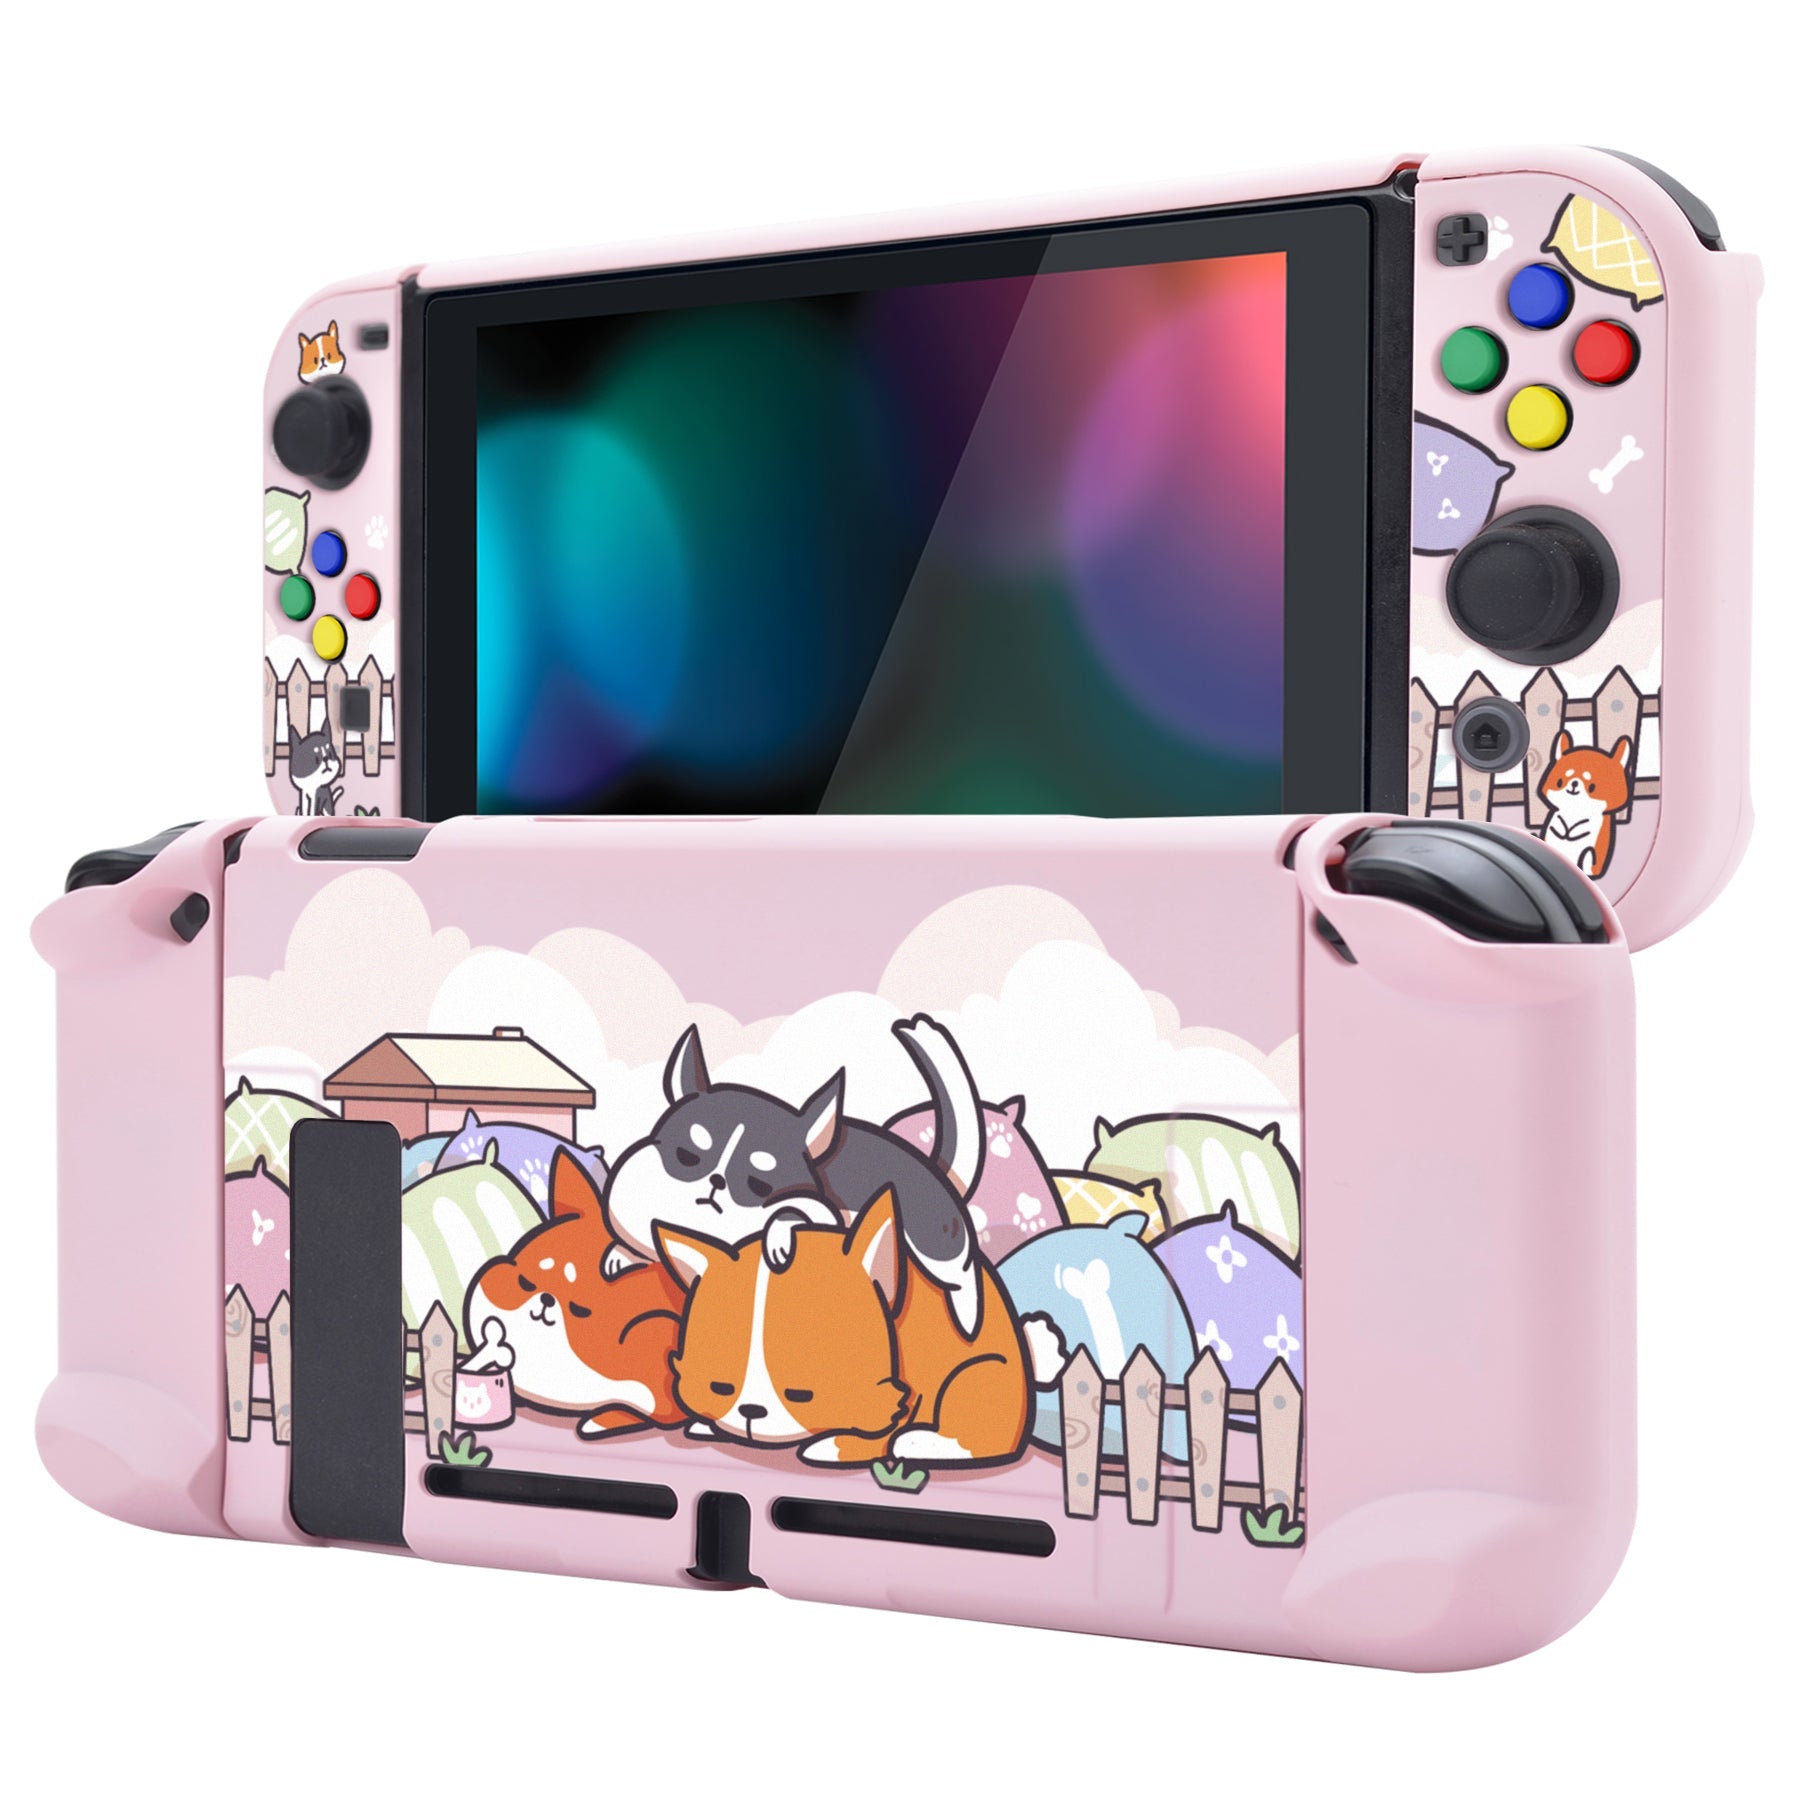 PlayVital Sleeping Shiba Inu Puppies Back Cover for NS Switch Console, NS Joycon Handheld Controller Separable Protector Hard Shell, Dockable Protective Case with Colorful ABXY Direction Button Caps - NTT111 PlayVital